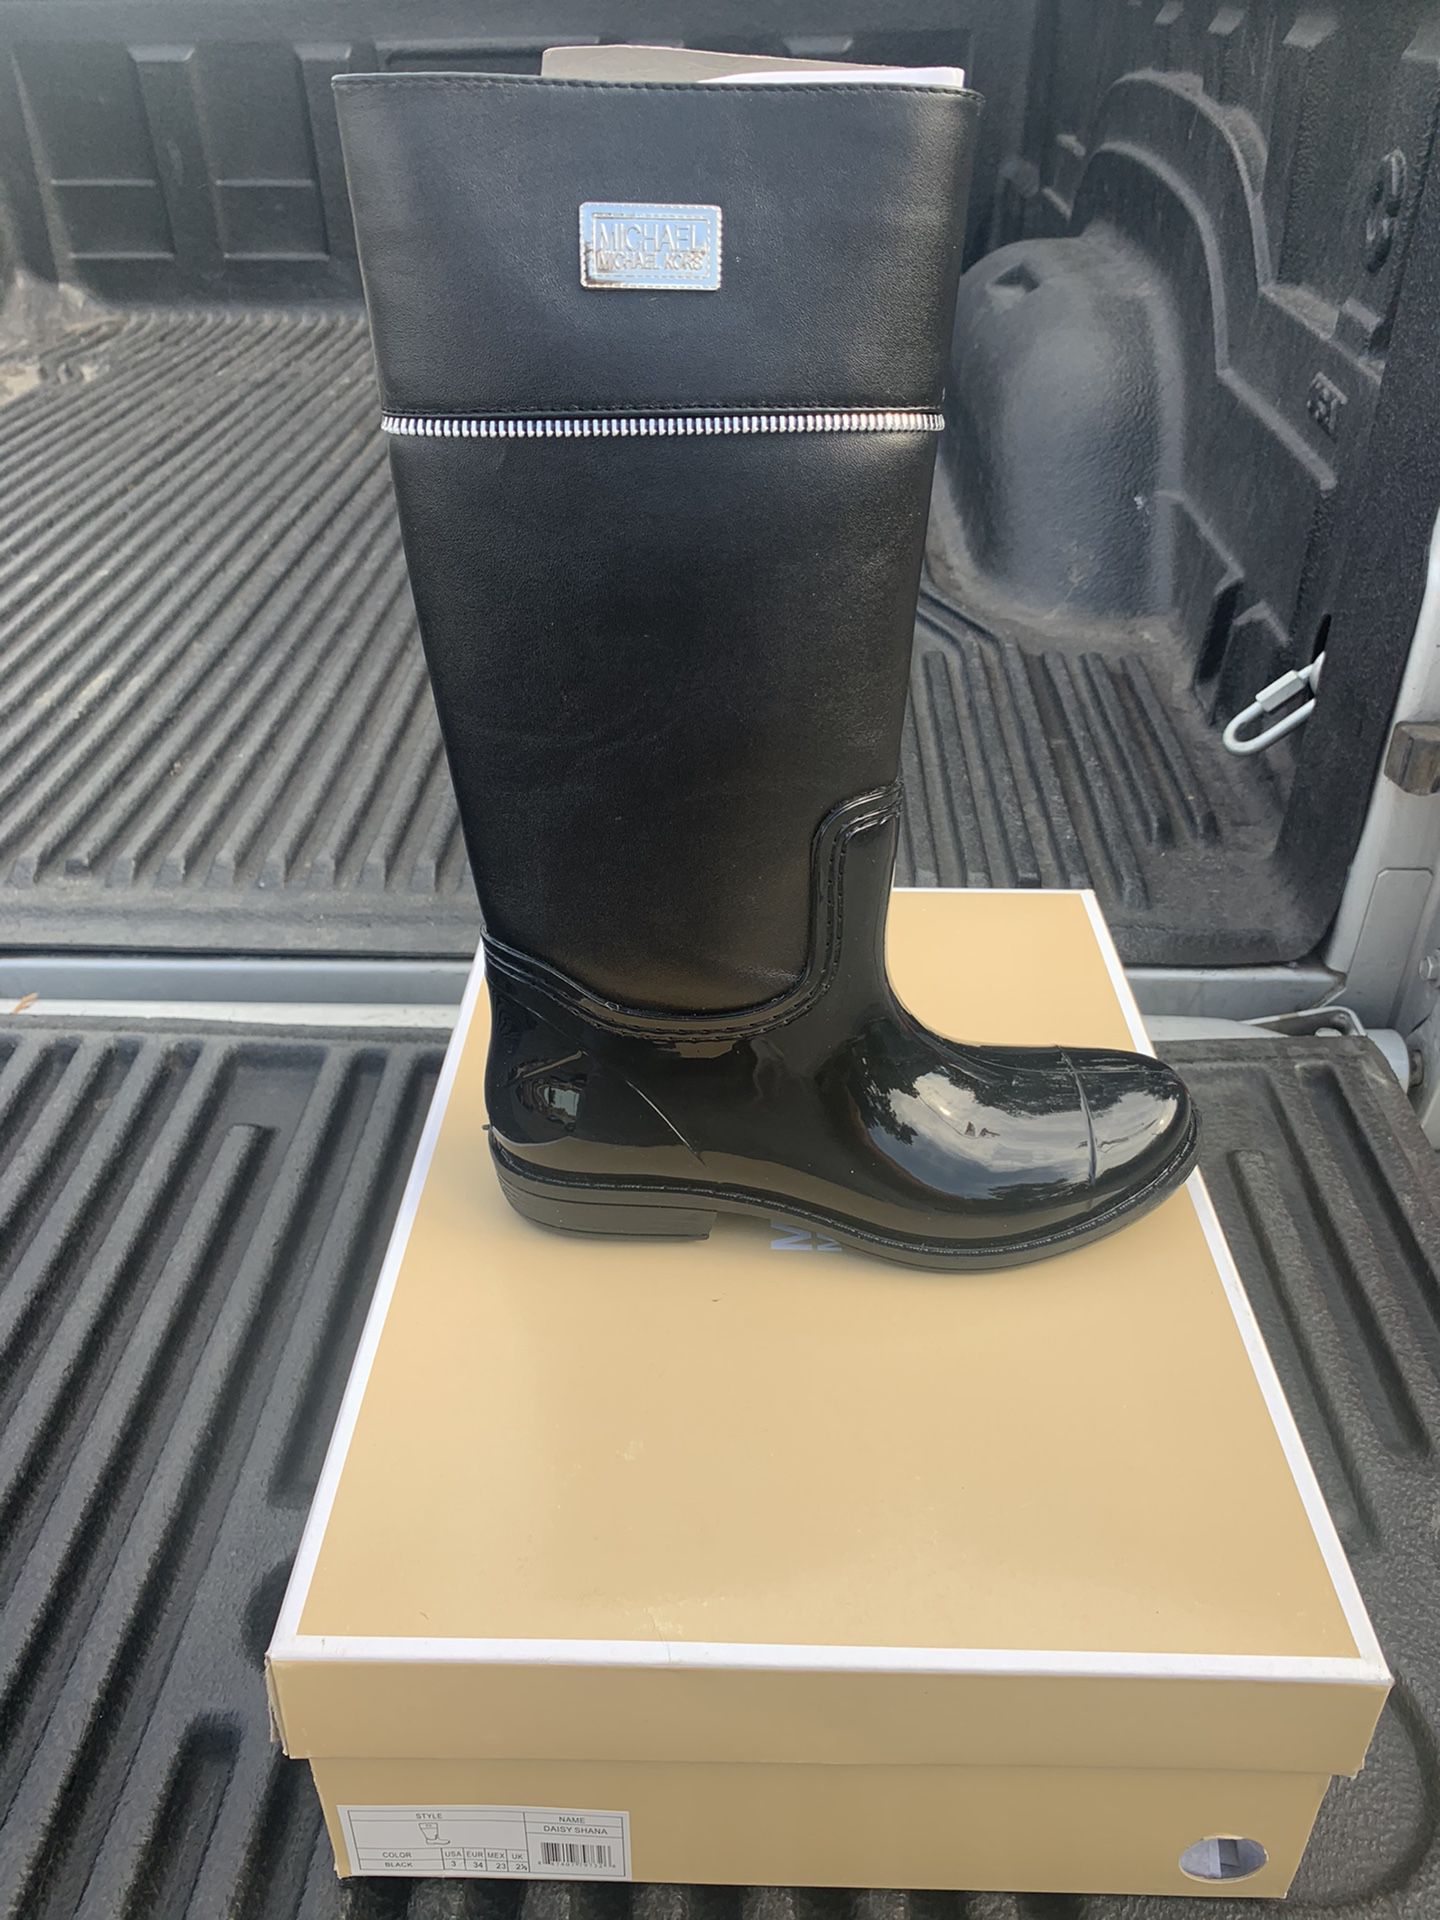 Michael kors rain boots size 2 and 3 (Authentic )